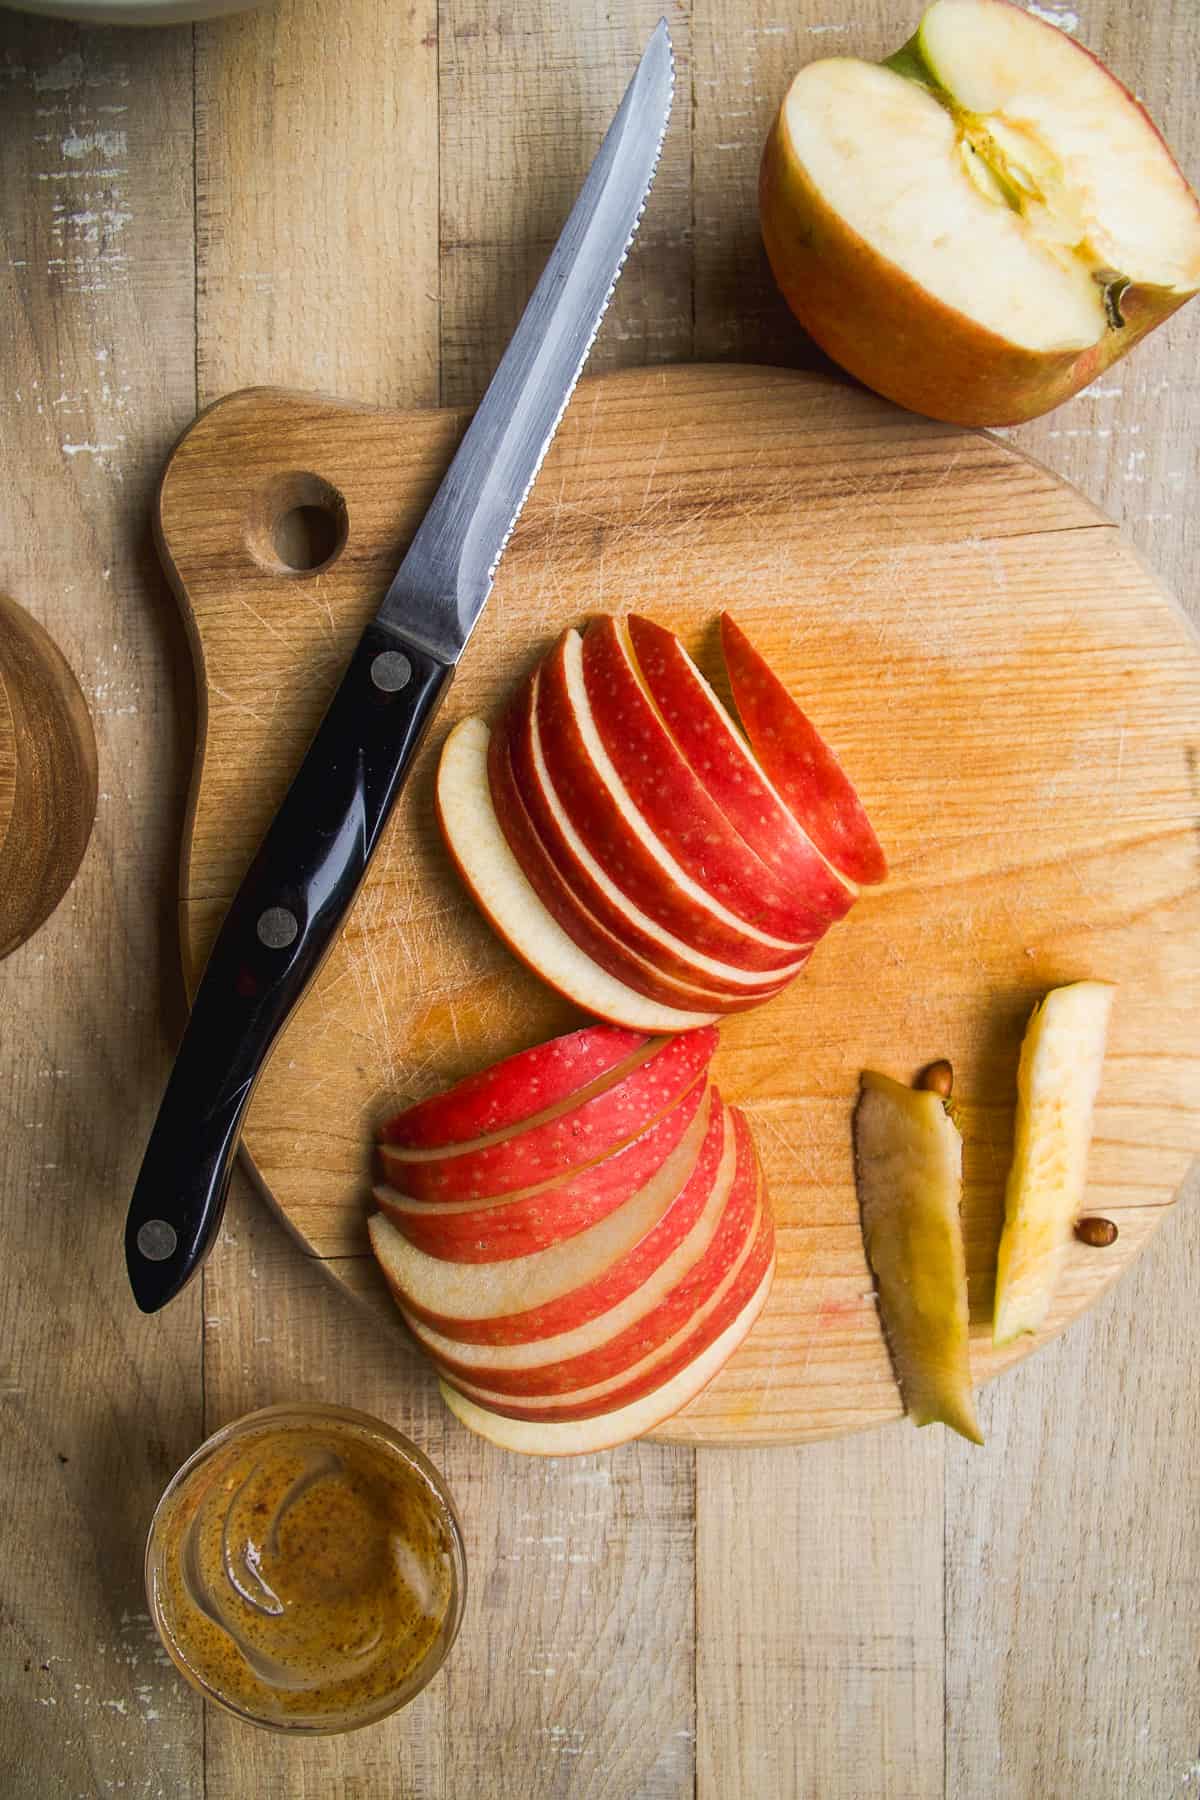 Apples cut into slices on a wooden cutting board.